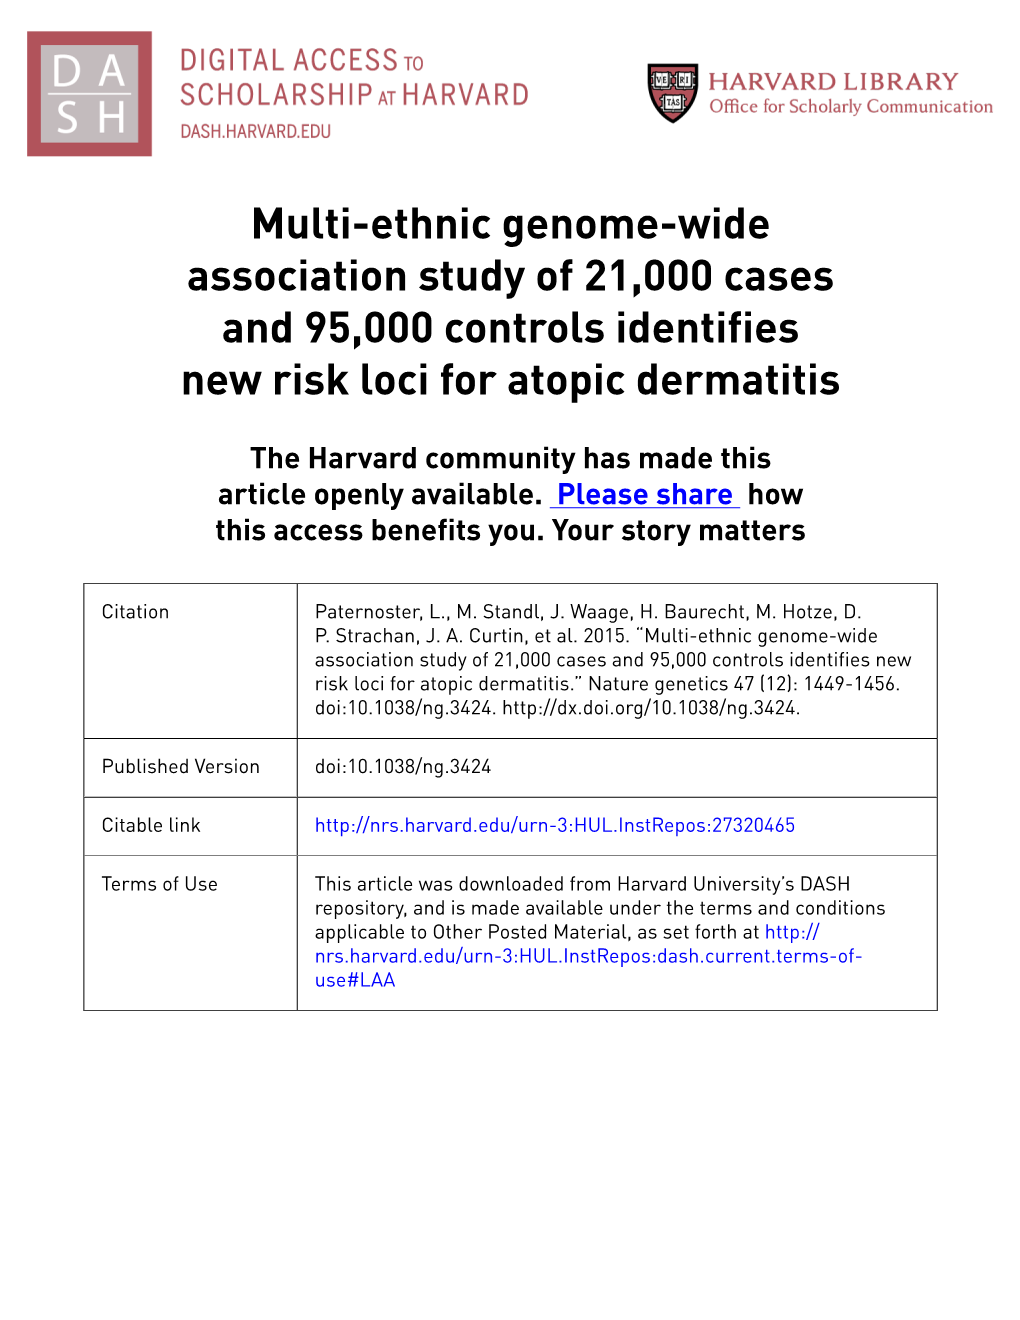 Multi-Ethnic Genome-Wide Association Study of 21,000 Cases and 95,000 Controls Identifies New Risk Loci for Atopic Dermatitis